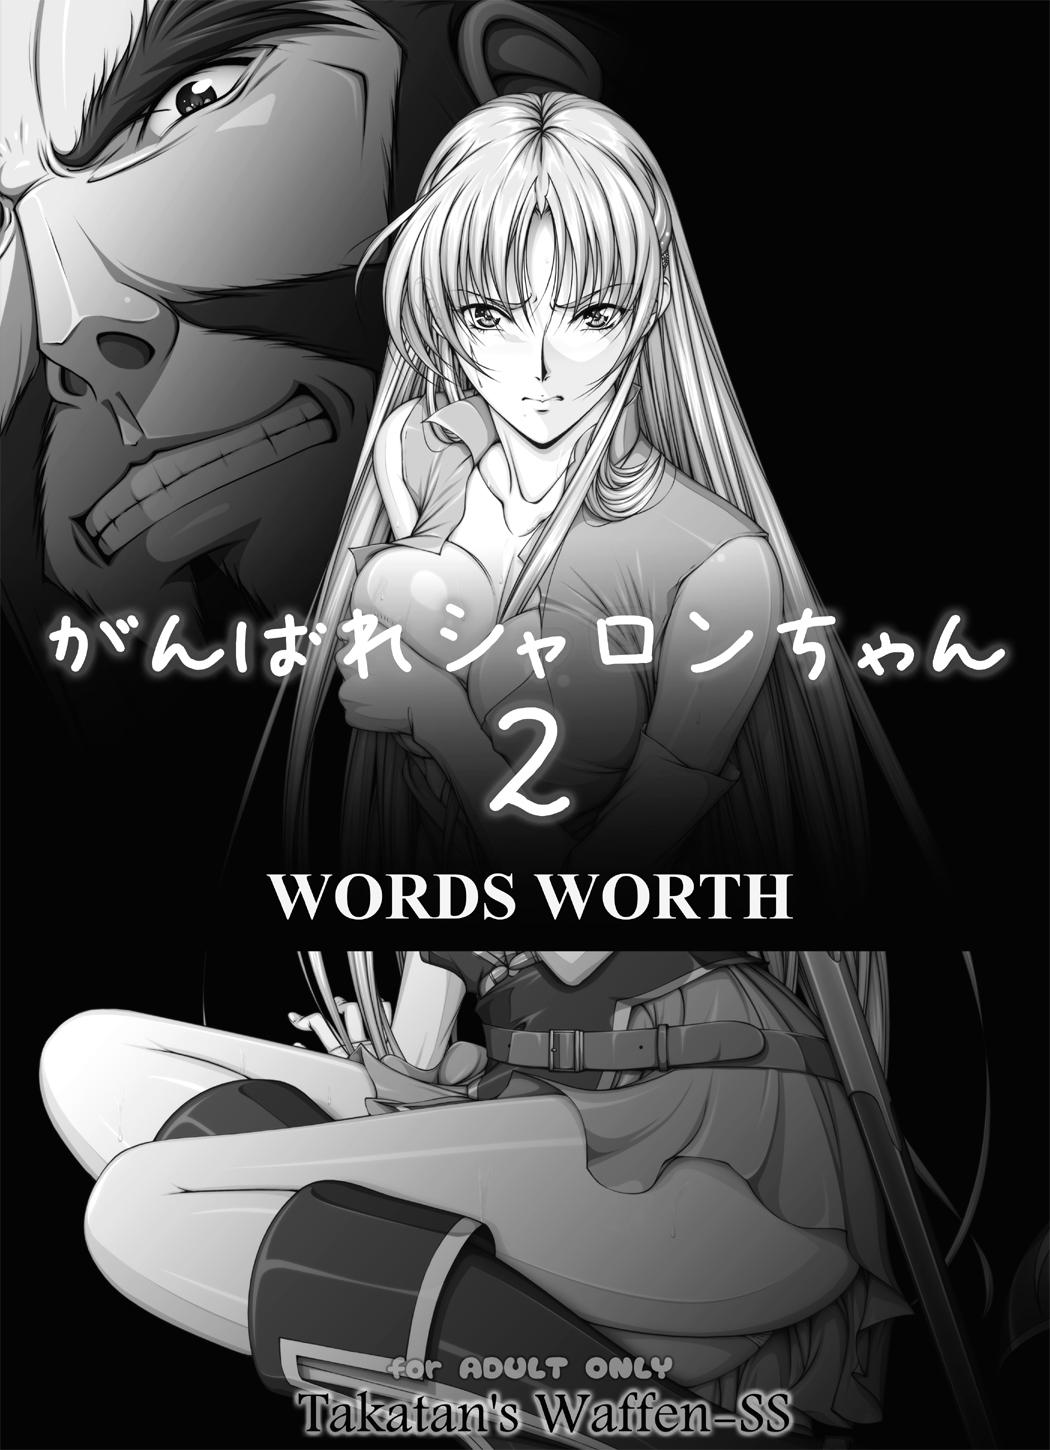 British [Takatan's Waffen-SS] Fight, Sharon! 2 [Deluxe Edition] (Words Worth) +omake - Words worth Perfect Butt - Page 8